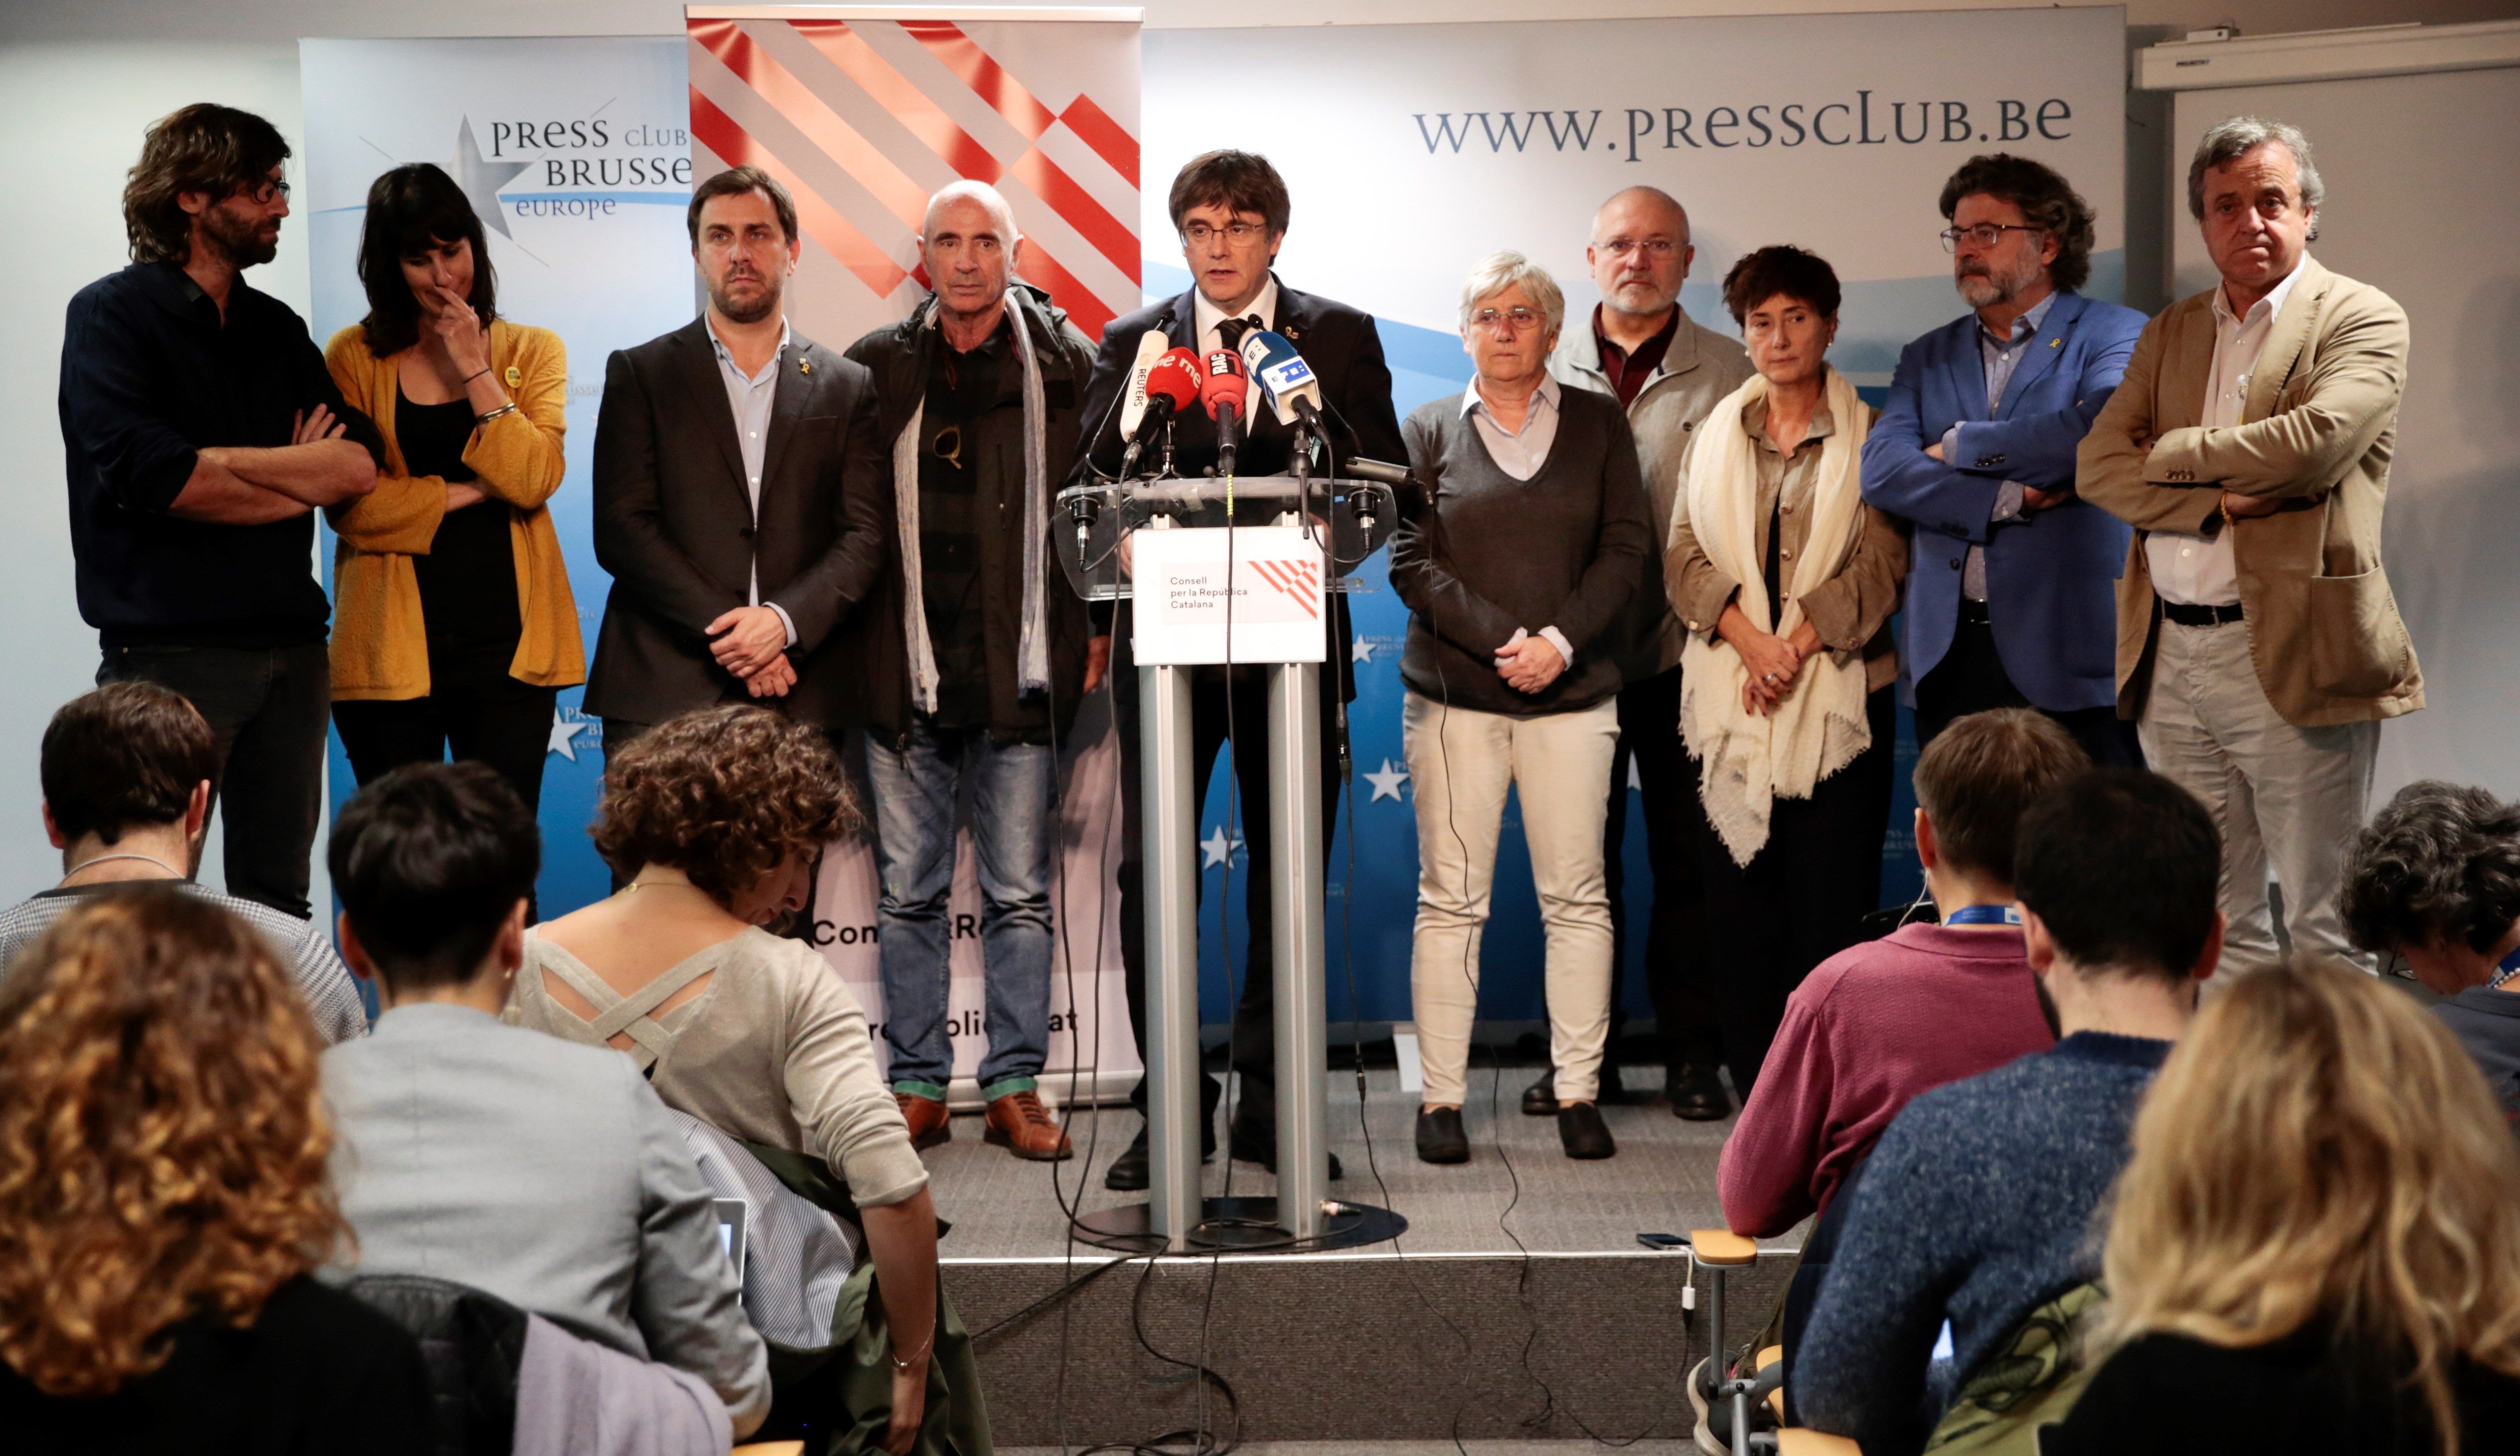 Council for the Catalan Republic: "The police violence must be investigated"